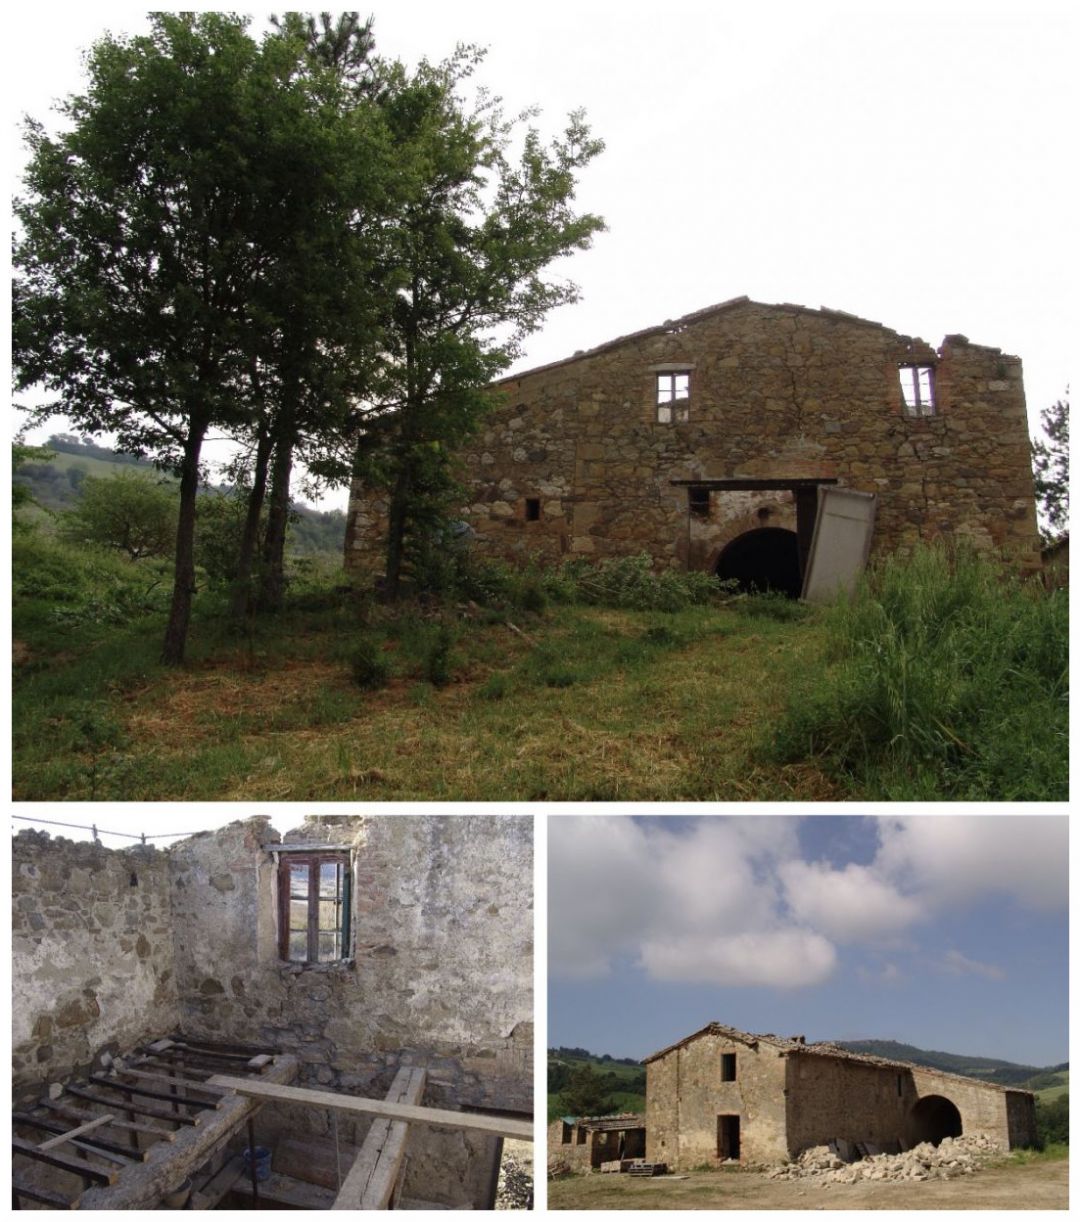 Follonico Tuscany | Farmhouse to Guesthouse | Restoration Hotels - The Collection of ruins to fabulous | The Aficionados Journal 